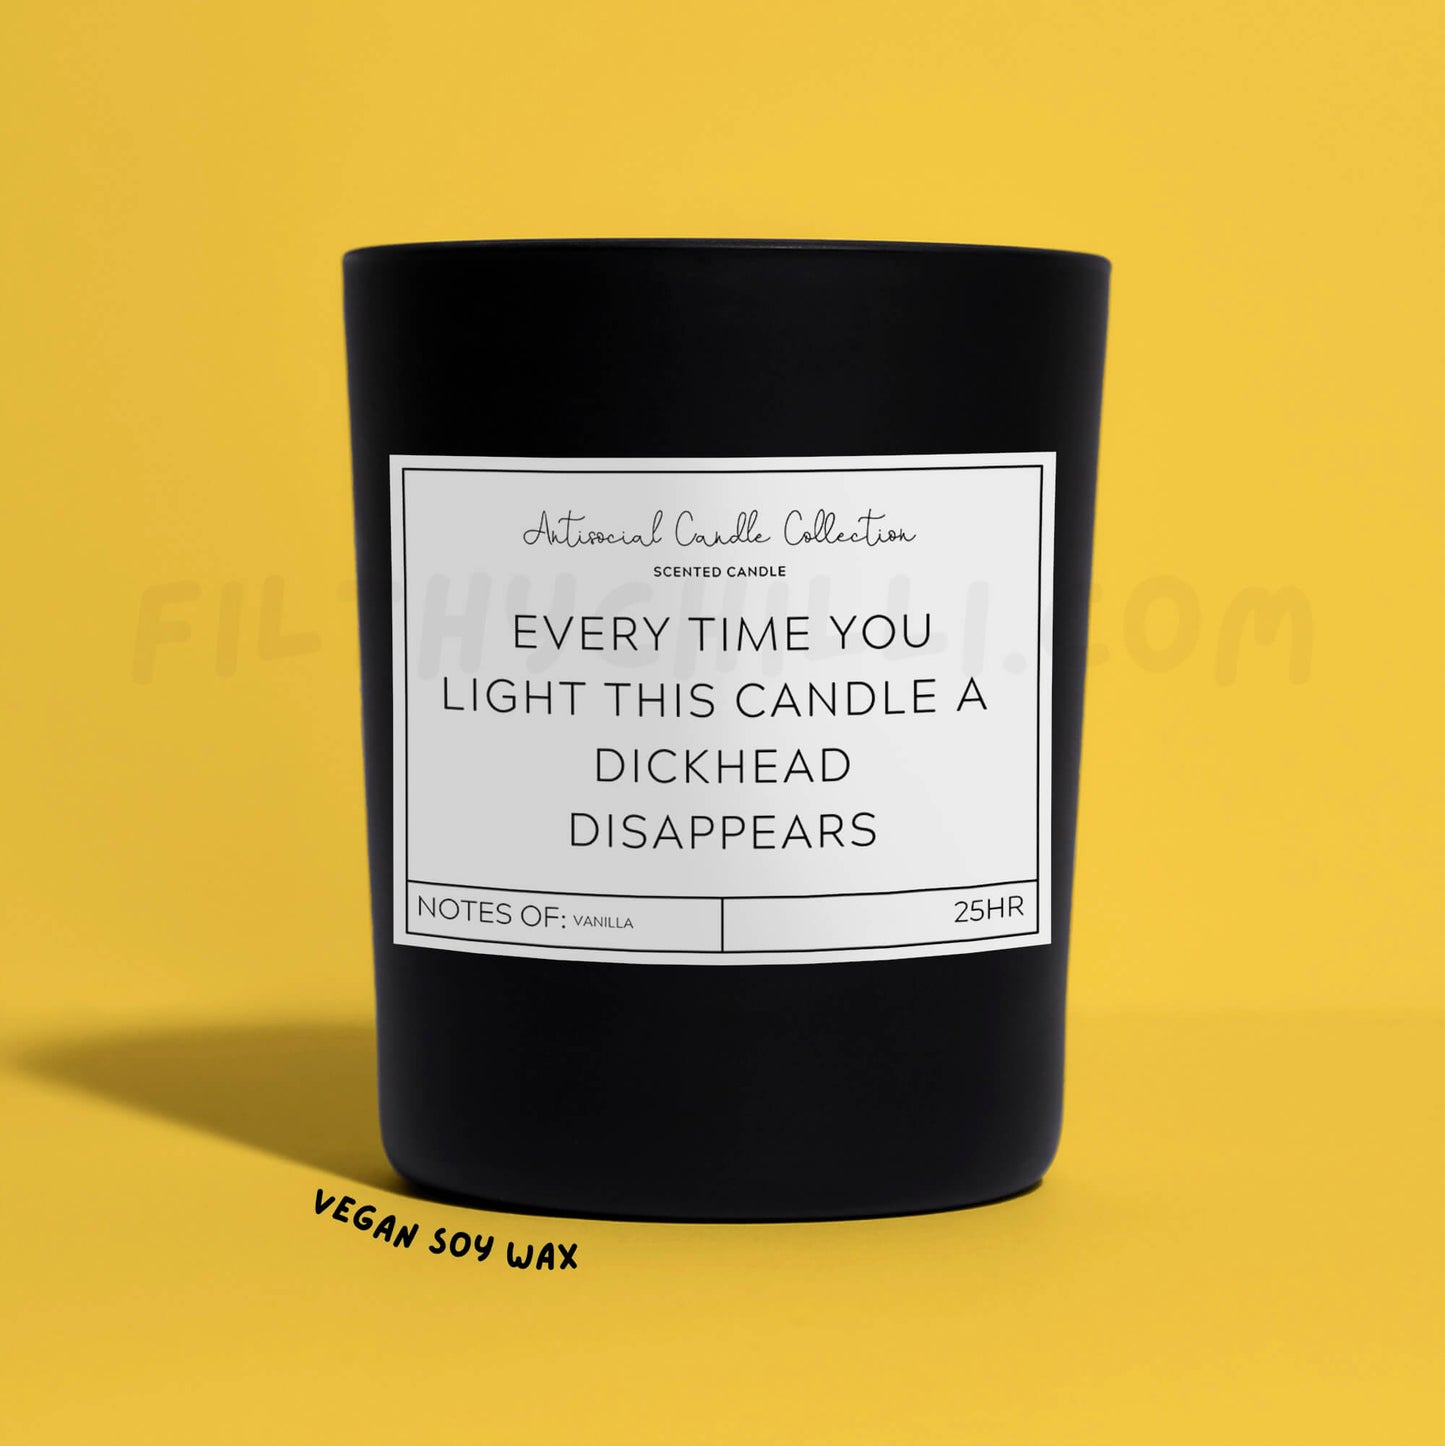 Dickhead Disappears Candle